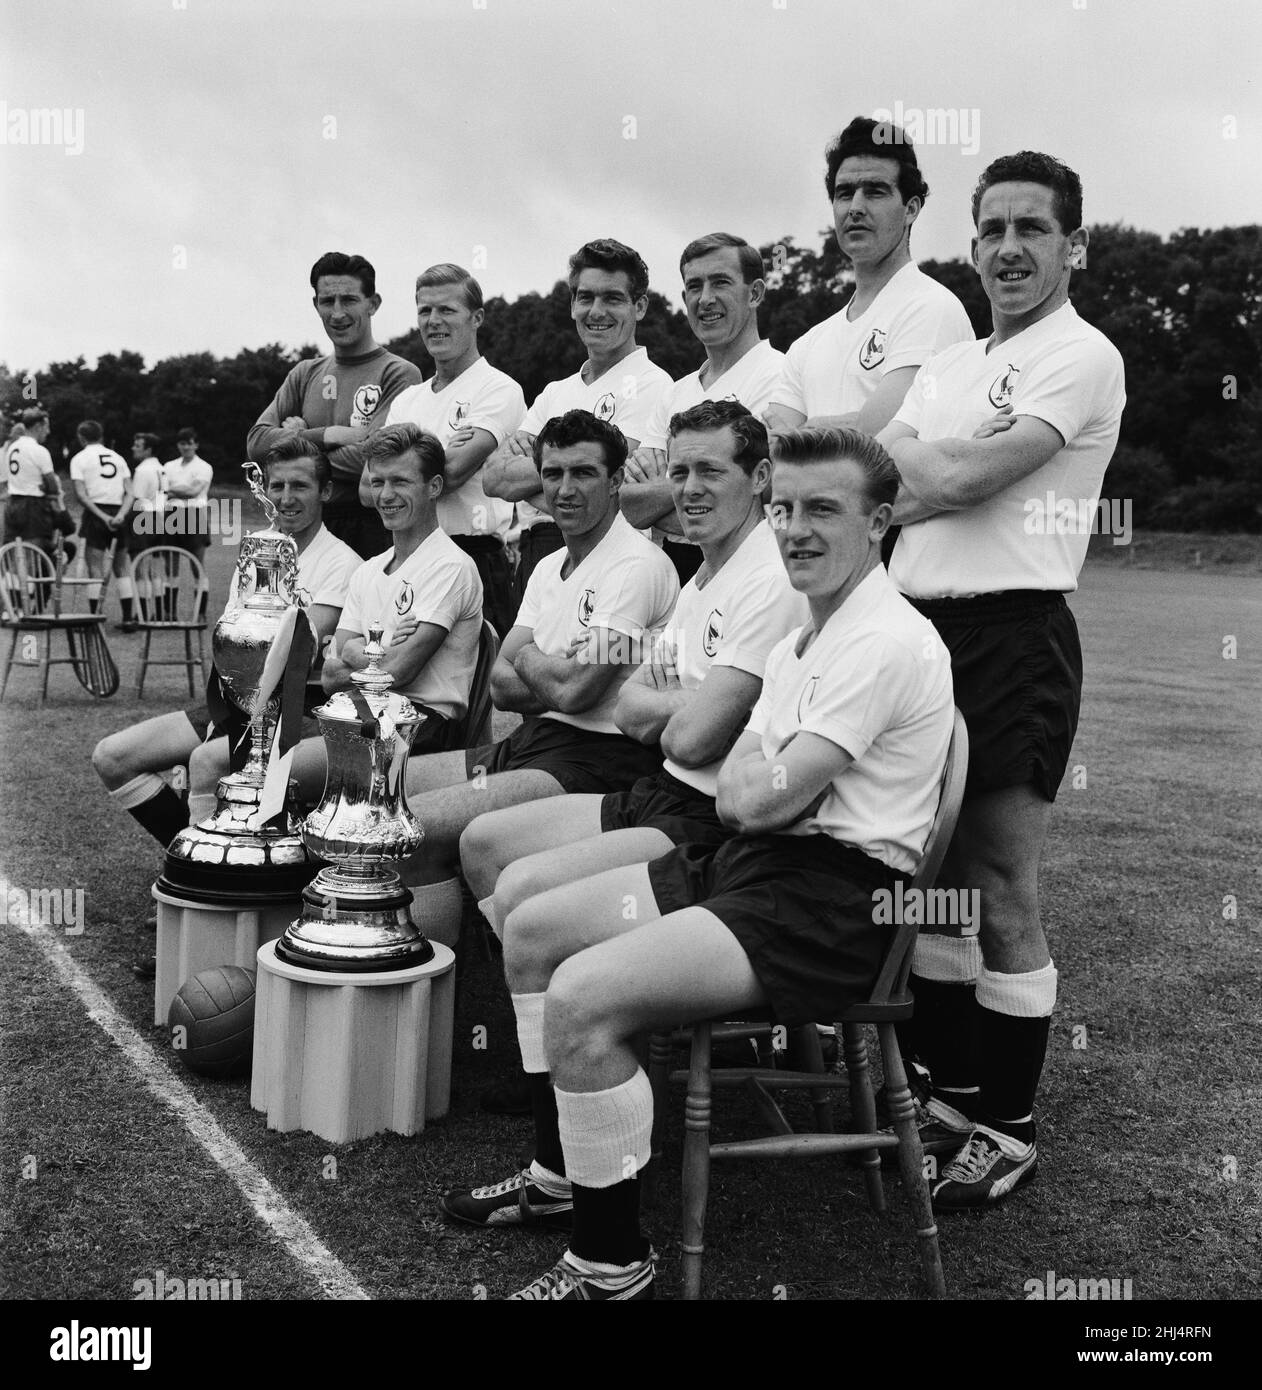 The double winning Tottenham Hotspur Football Club are pictured at Cheshunt, prior to the start of the new season. They are back row L-R: Bill Brown, Ron Henry, Peter Baker, Danny Blanchflower, Maurice Norman, and Dave Mackay. Front Row L-R: Cliff Jones, John White, Bobby Smith, Les Allen, and Terry Dyson 4th August 1961.  *** Local Caption *** Squad Stock Photo